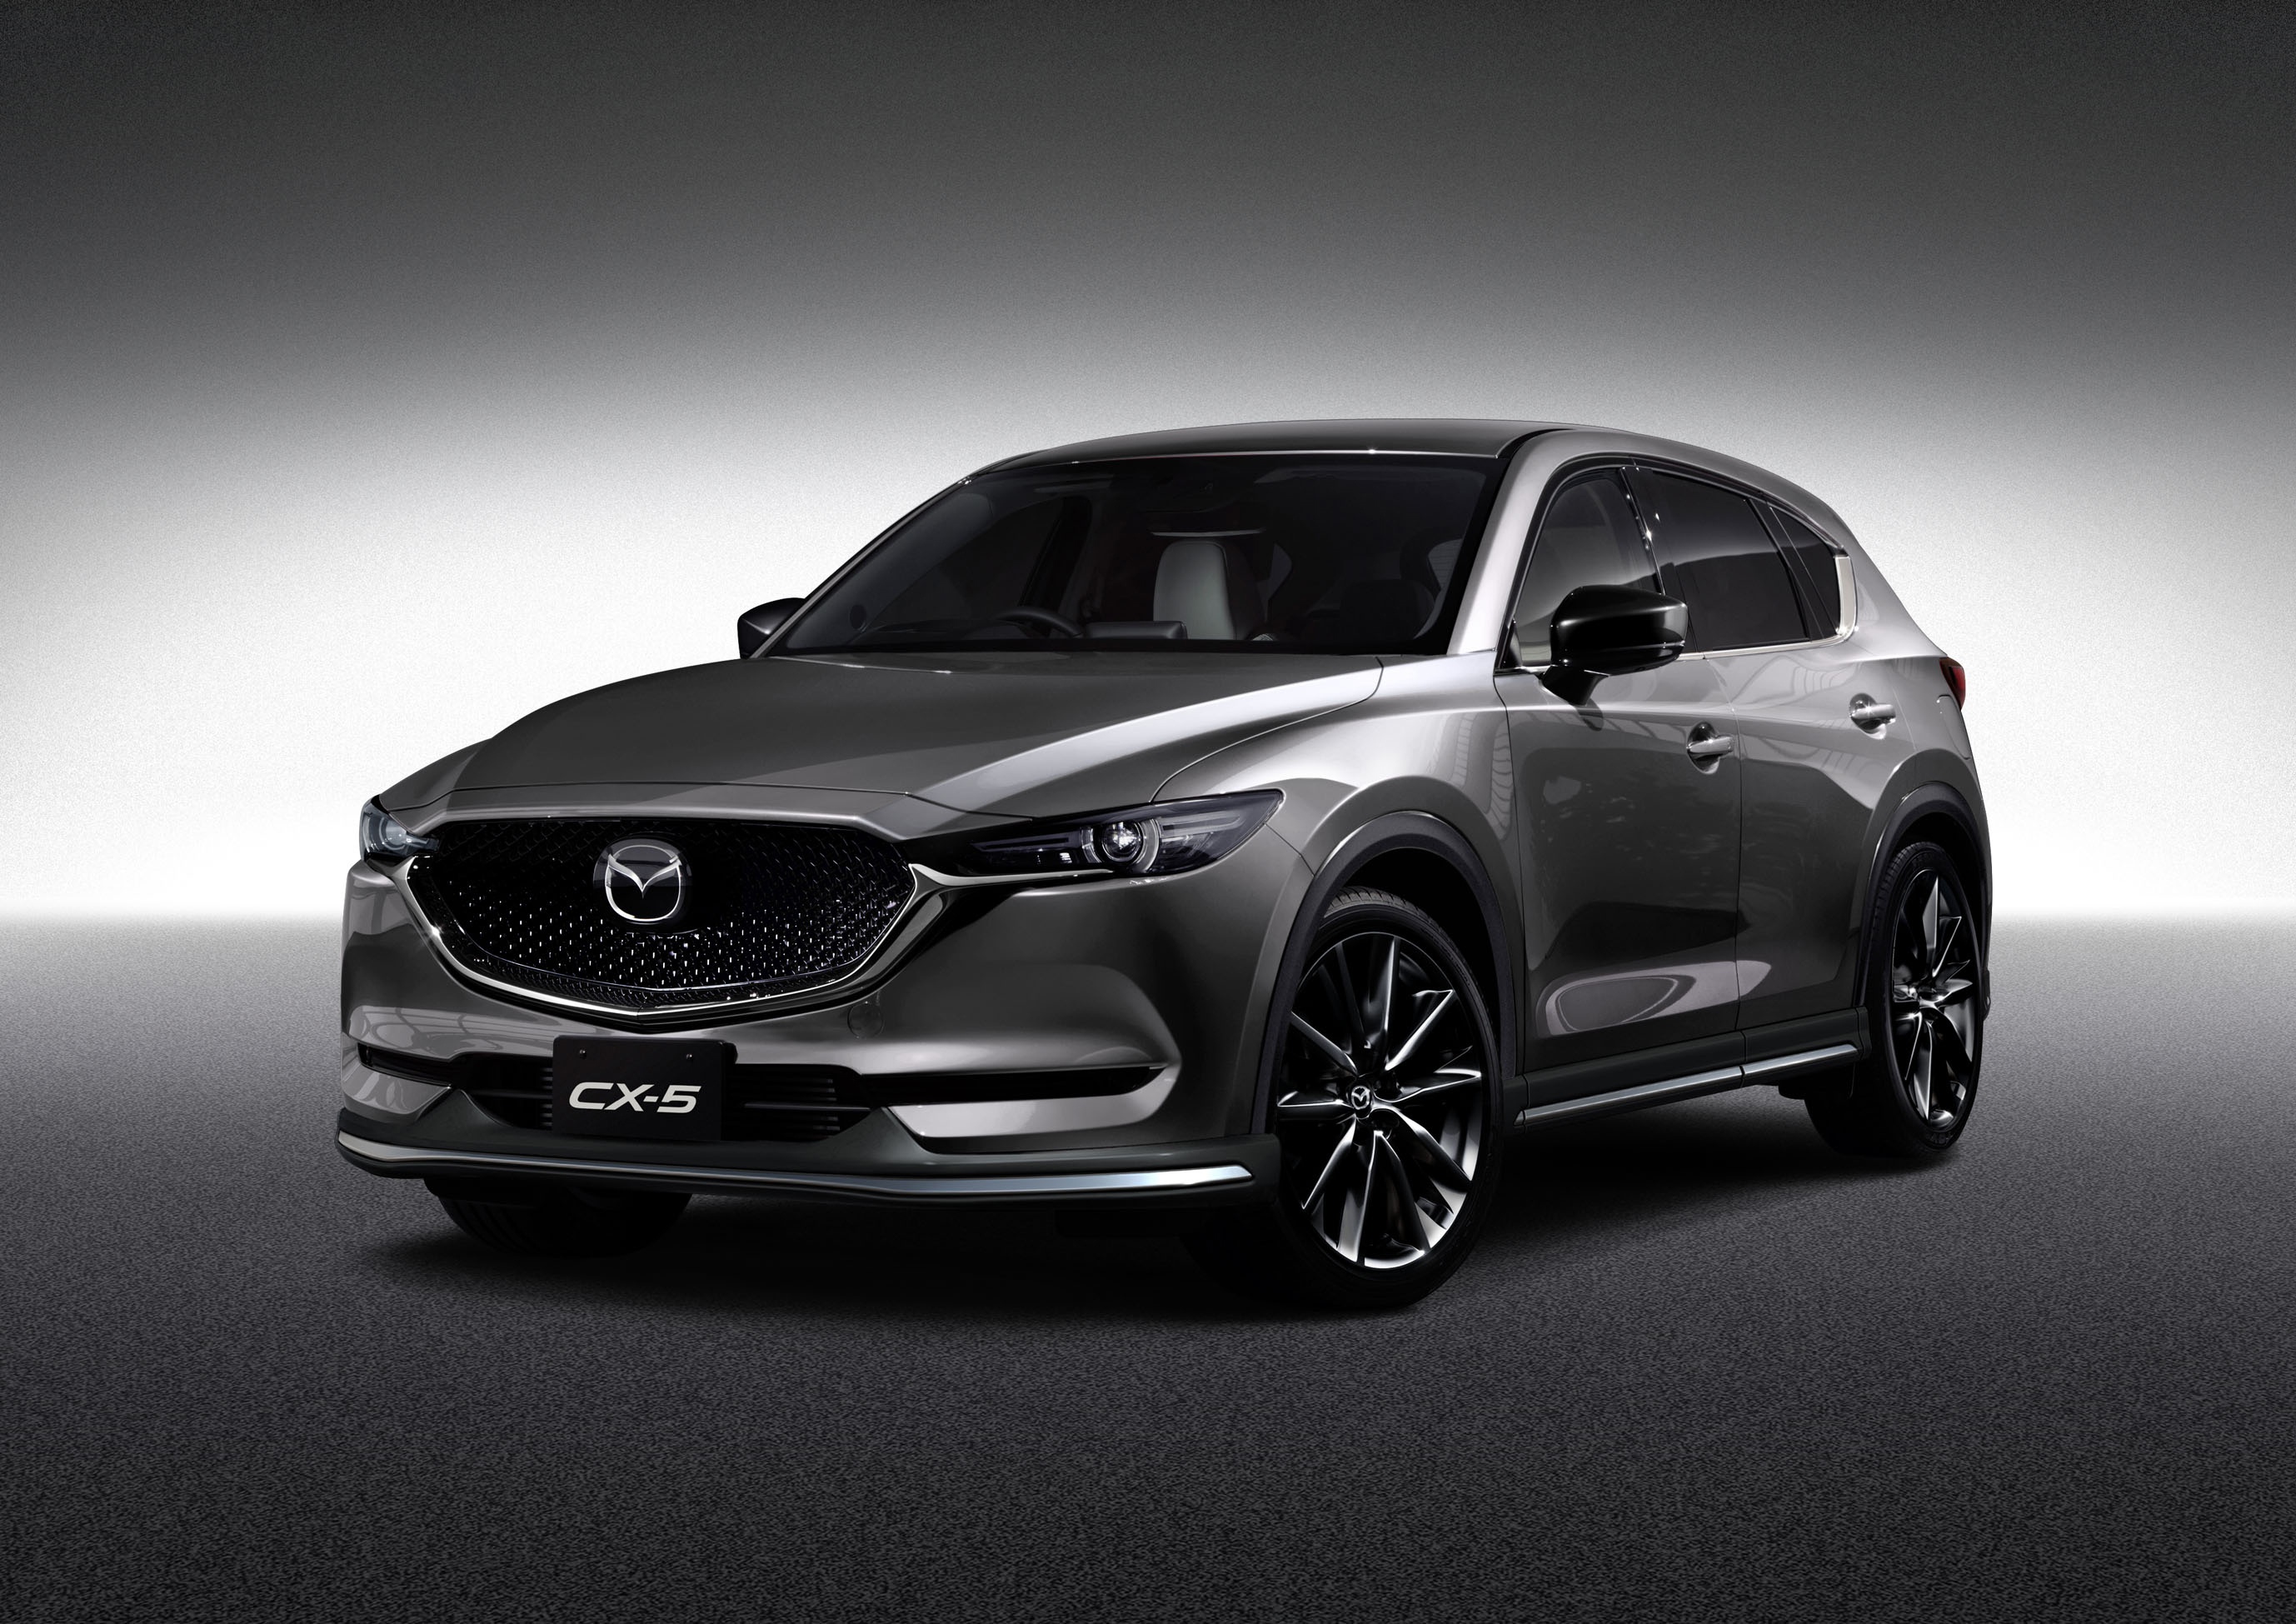 Best Mazda Cx 5 Background for mobile